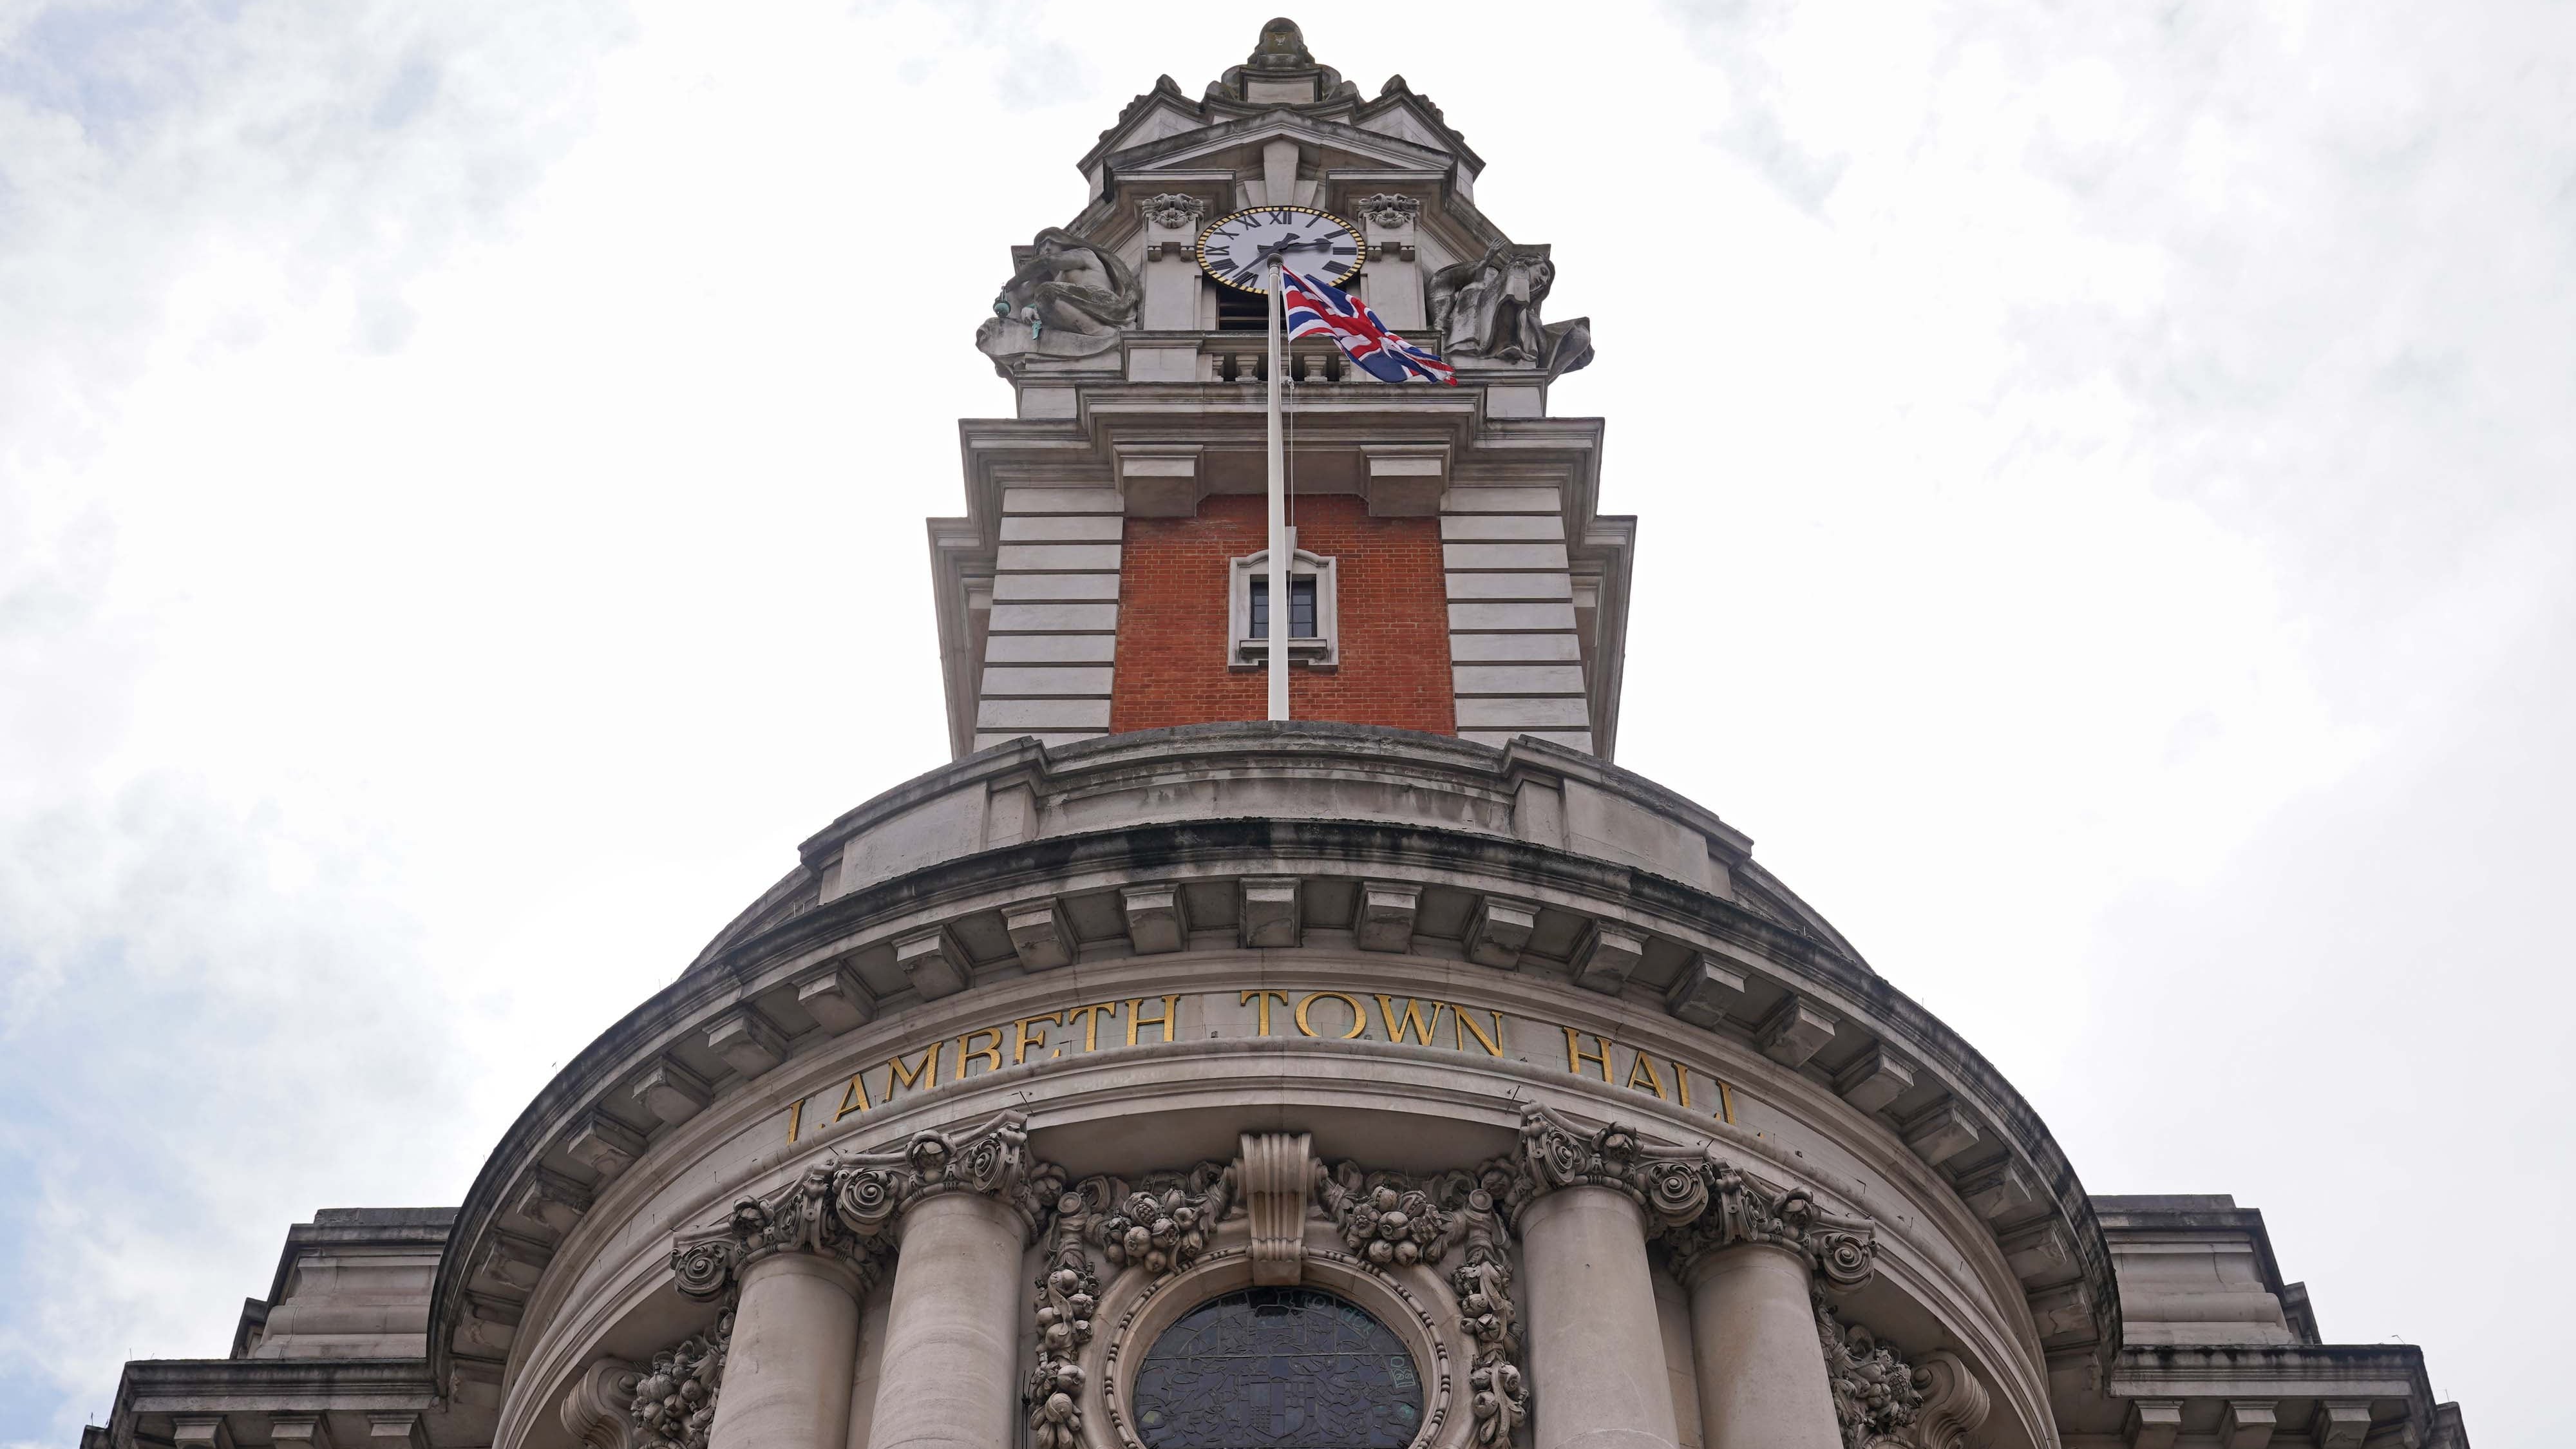 Lambeth town hall in south London